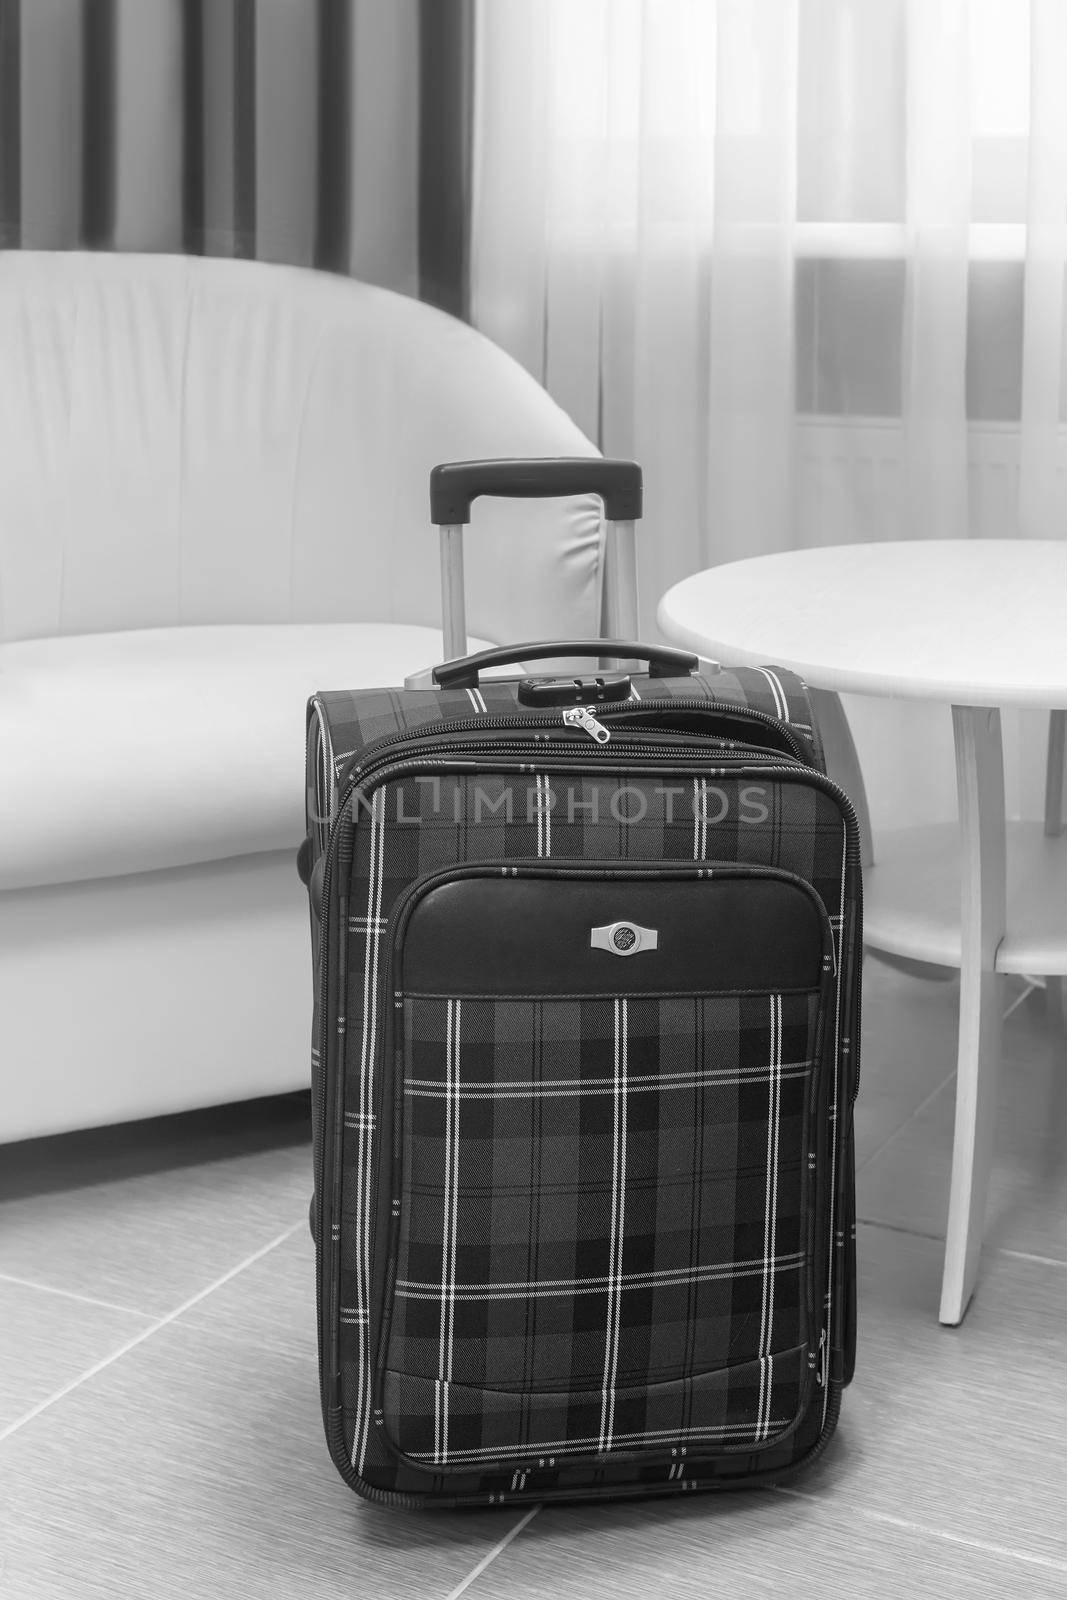 Traveler's suitcase in a cozy hotel room by georgina198